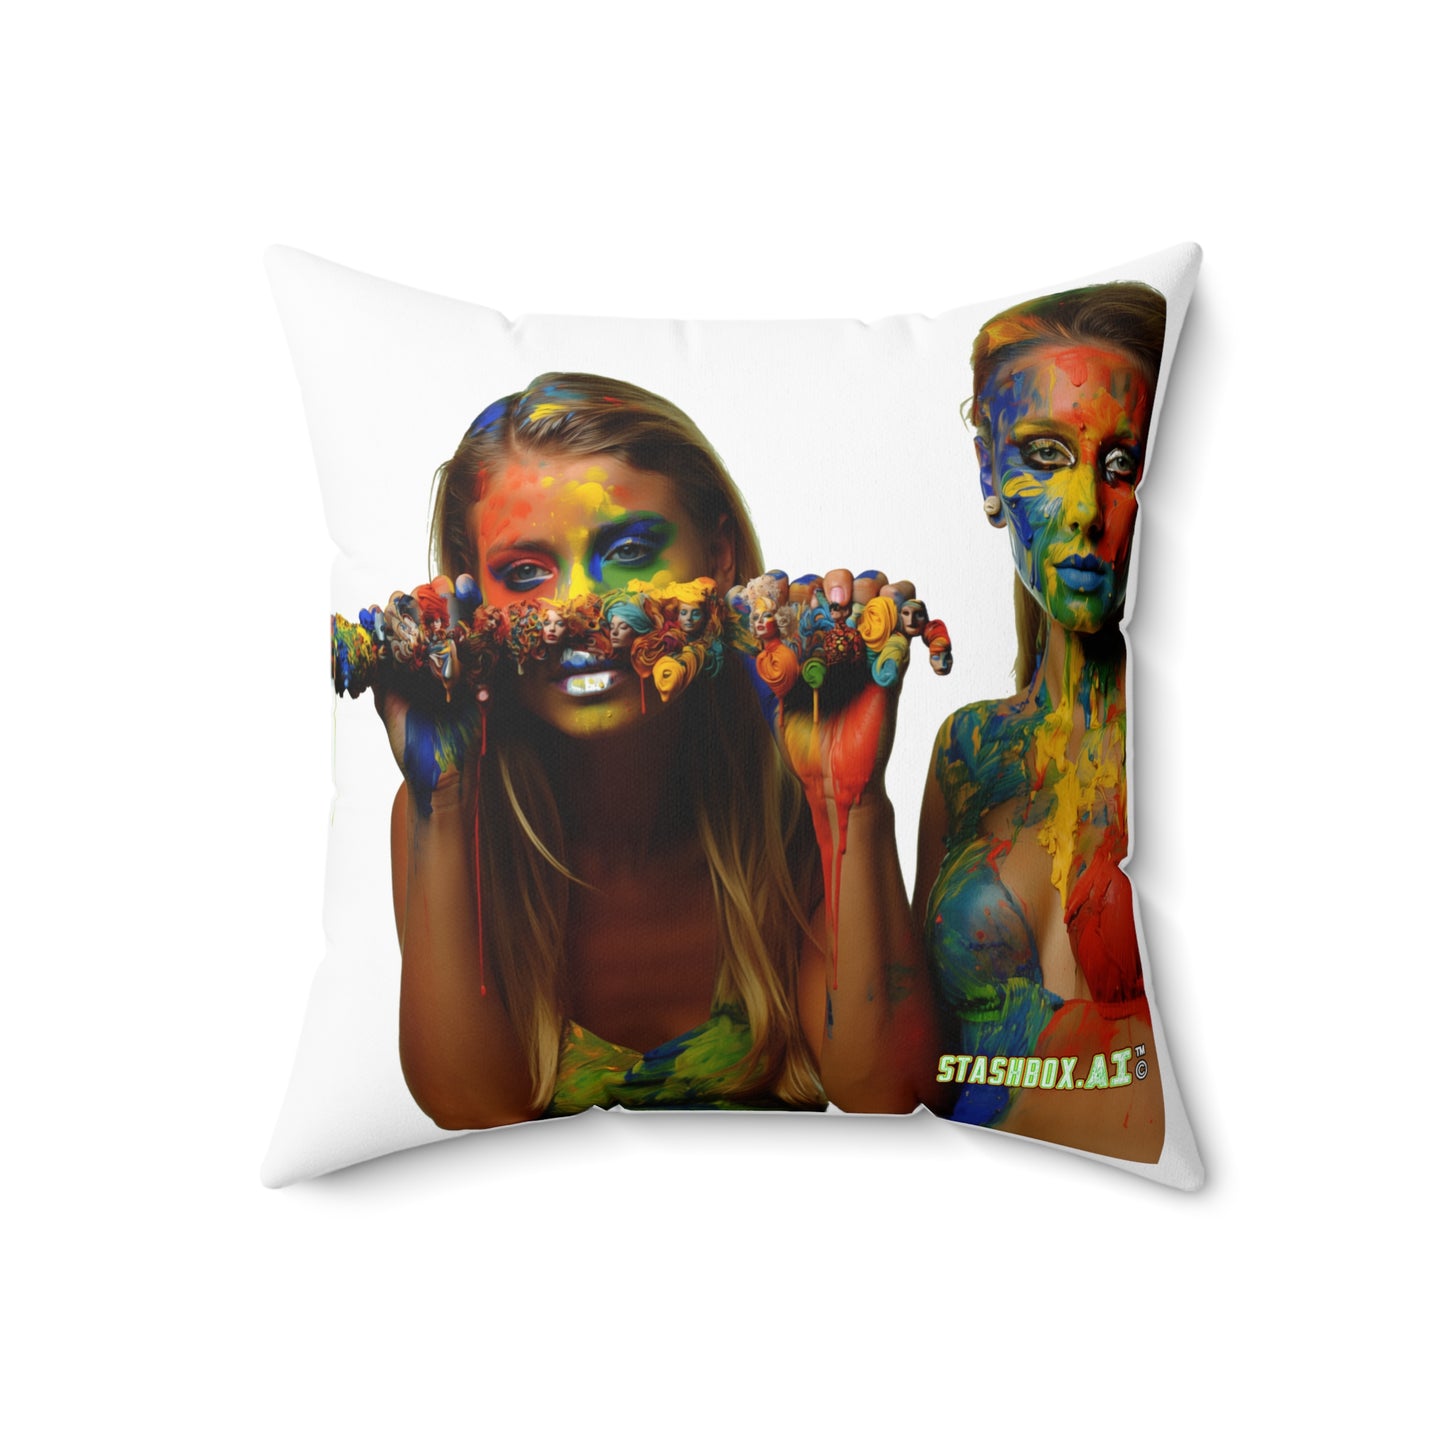 Faux Suede Square Pillow Rainbow Body Paint on Models 023/024